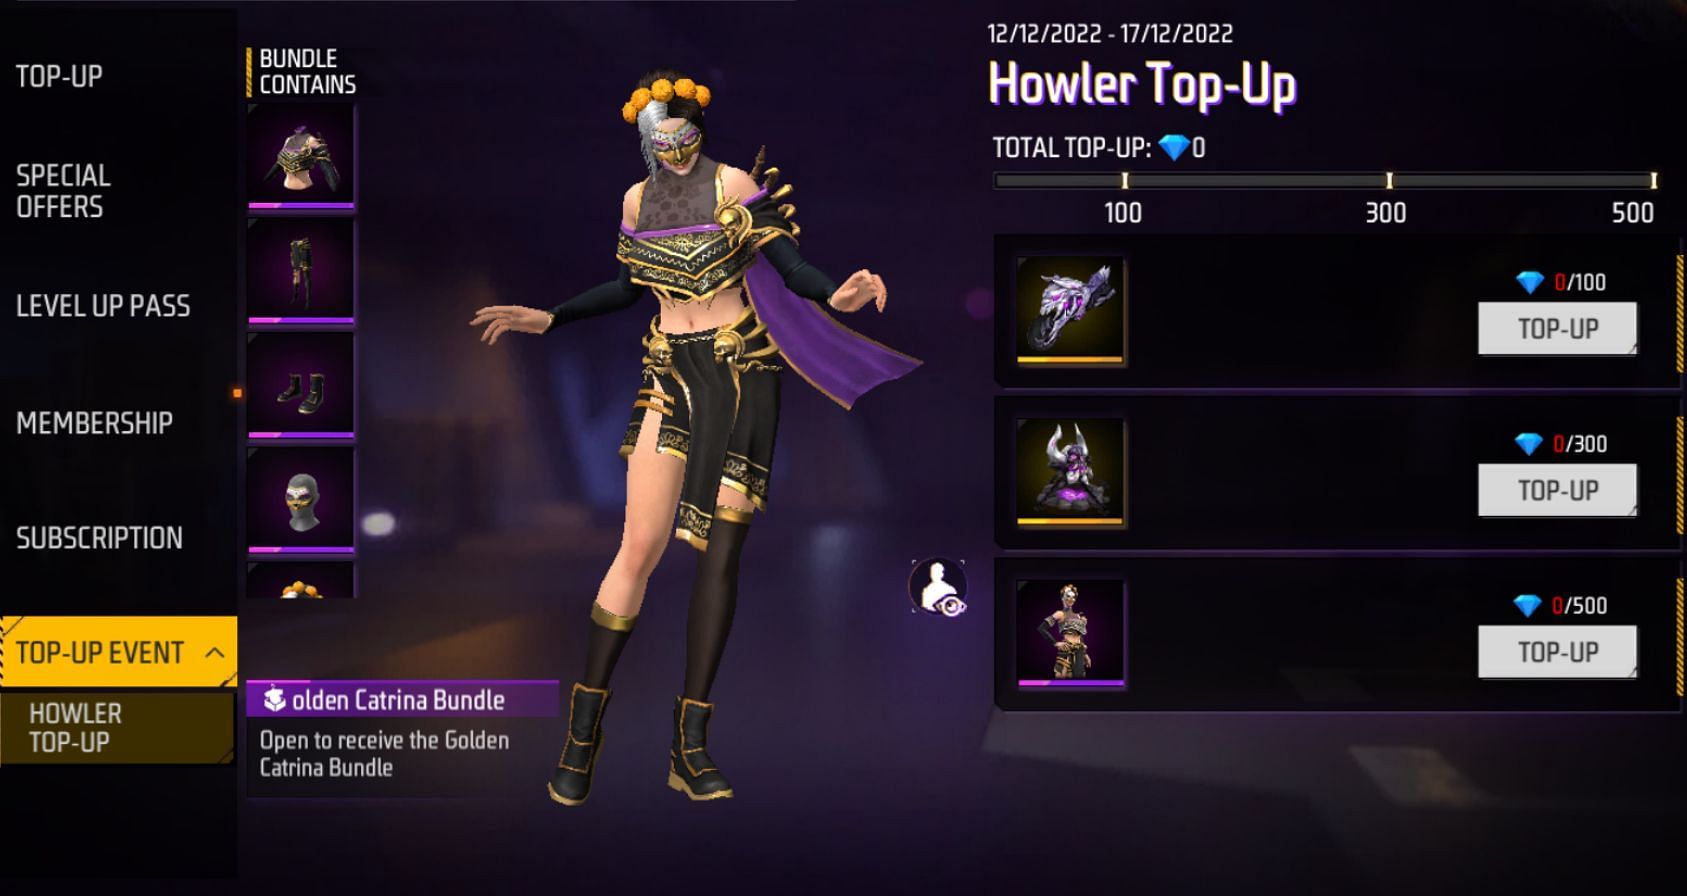 Access the Howler Top-Up via the Top-Up Event tab in the diamond section (Image via Garena)